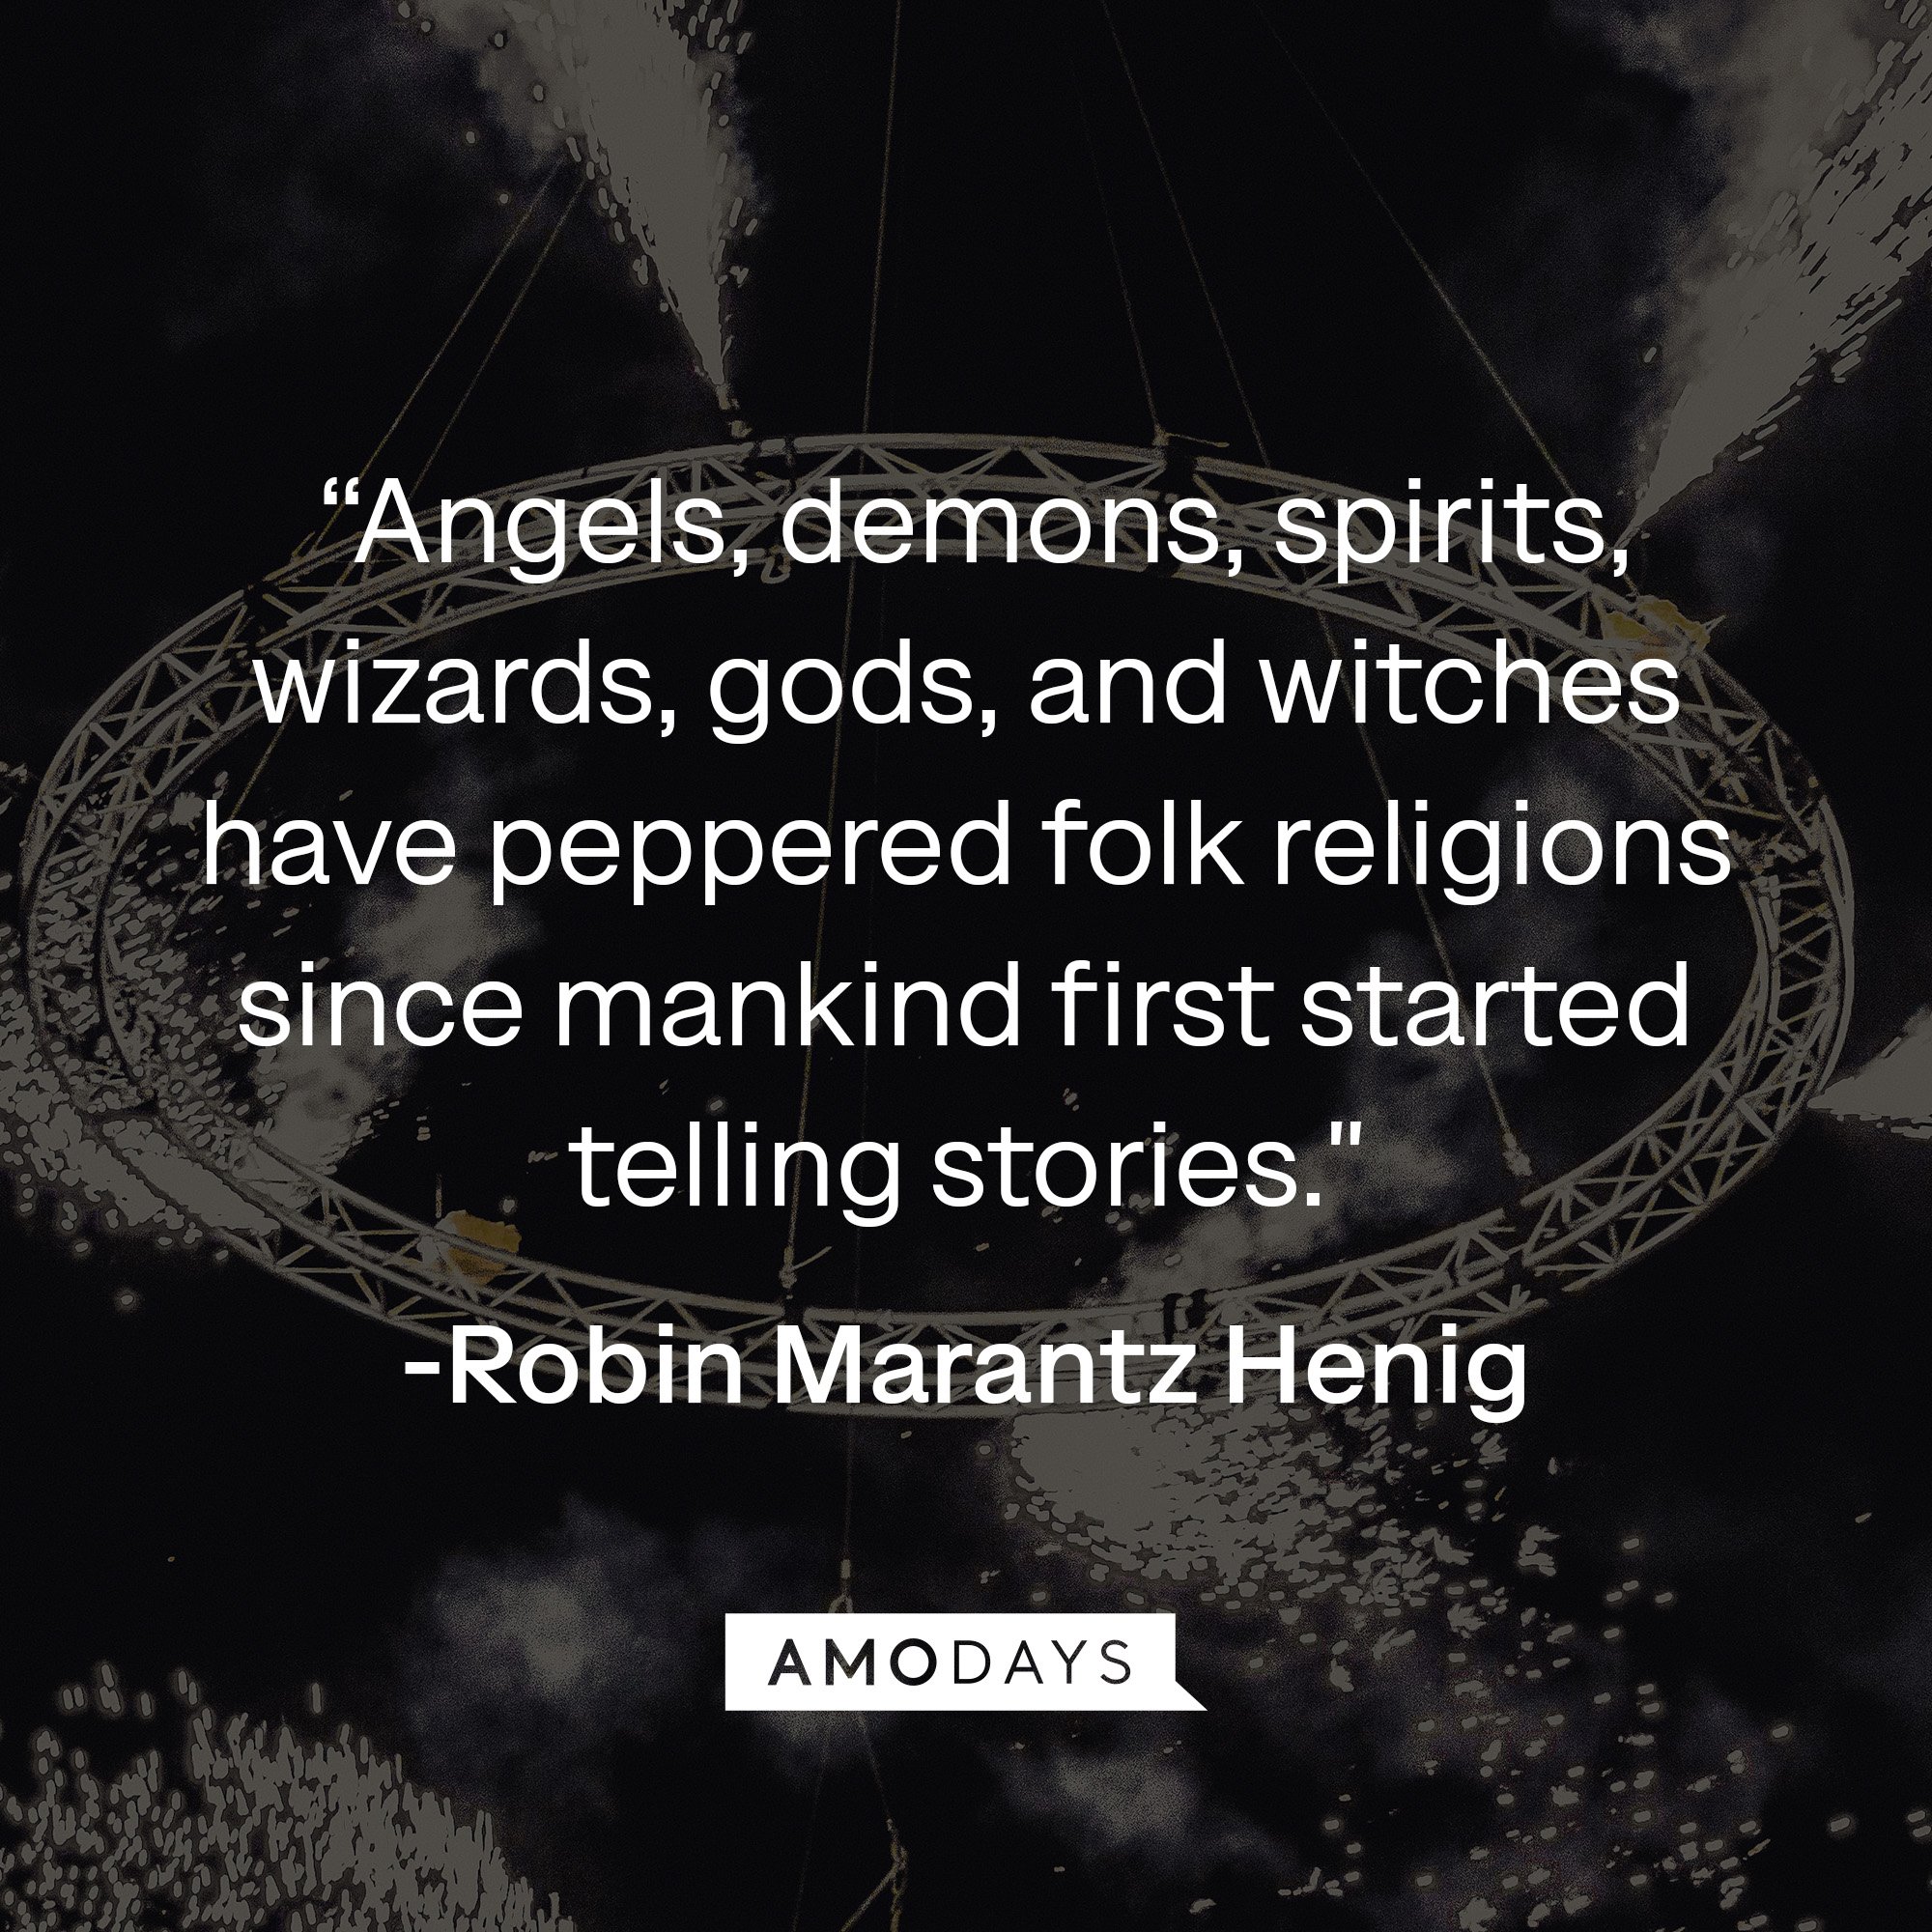 Robin Marantz Henig’s quote: "Angels, demons, spirits, wizards, gods, and witches have peppered folk religions since mankind first started telling stories." | Image: AmoDays